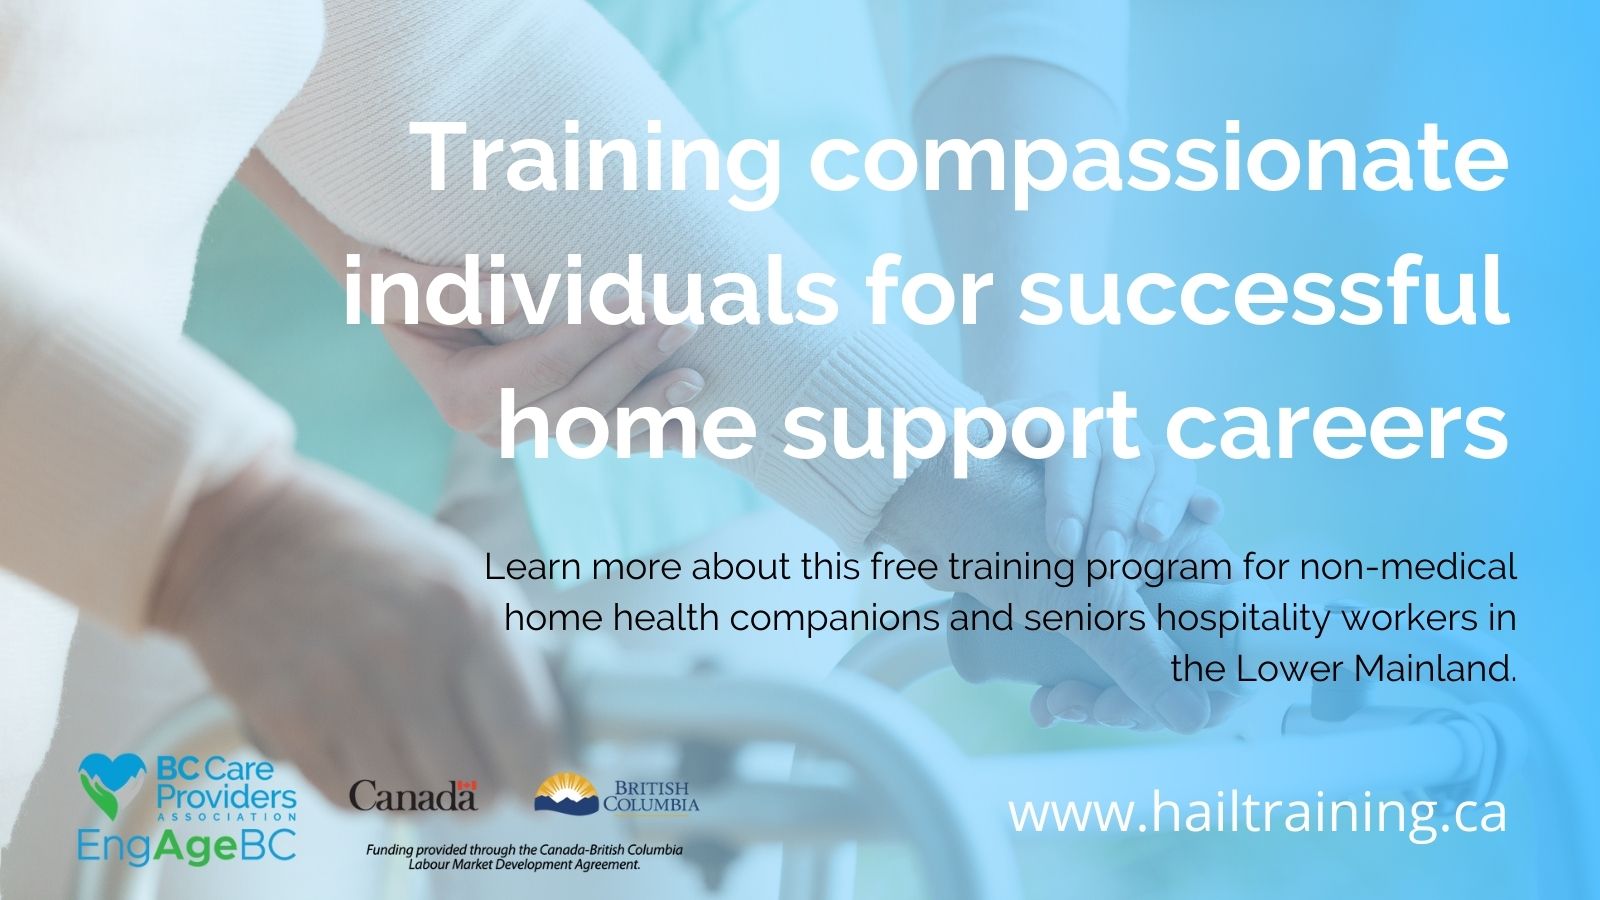 HaIL Training Program is recruiting for the Lower Mainland